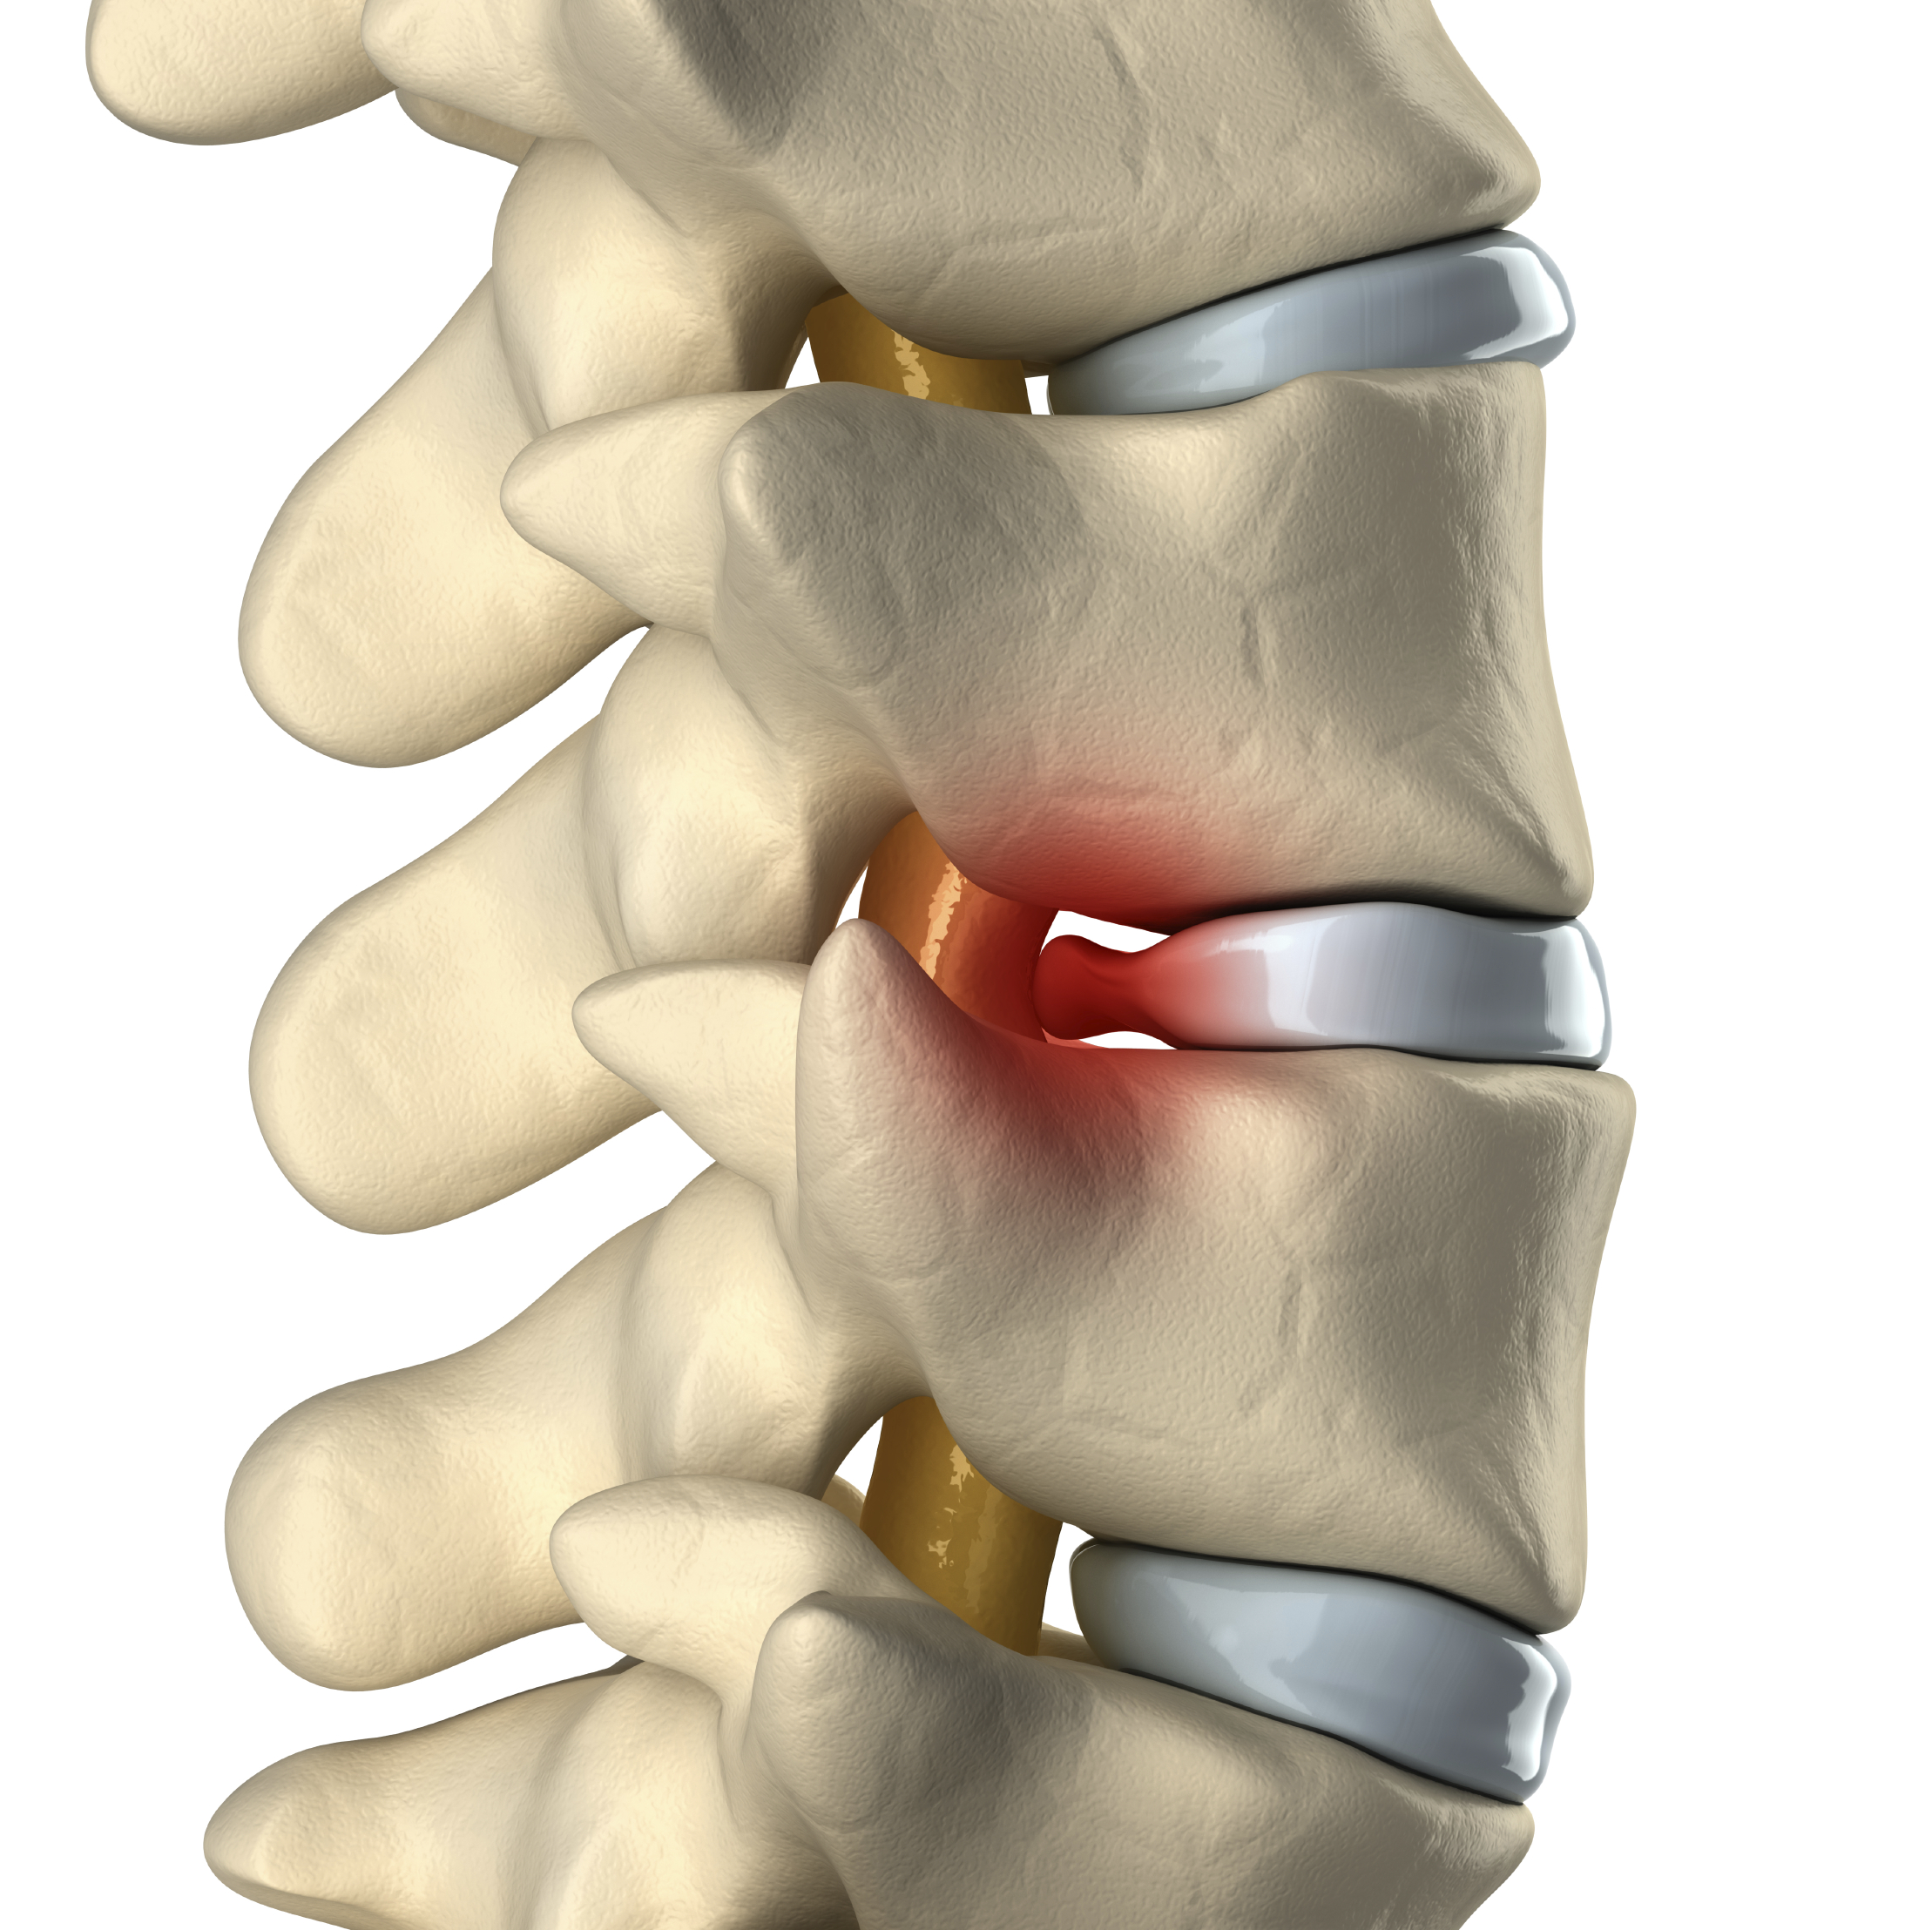 Spinal Disc Protrusion